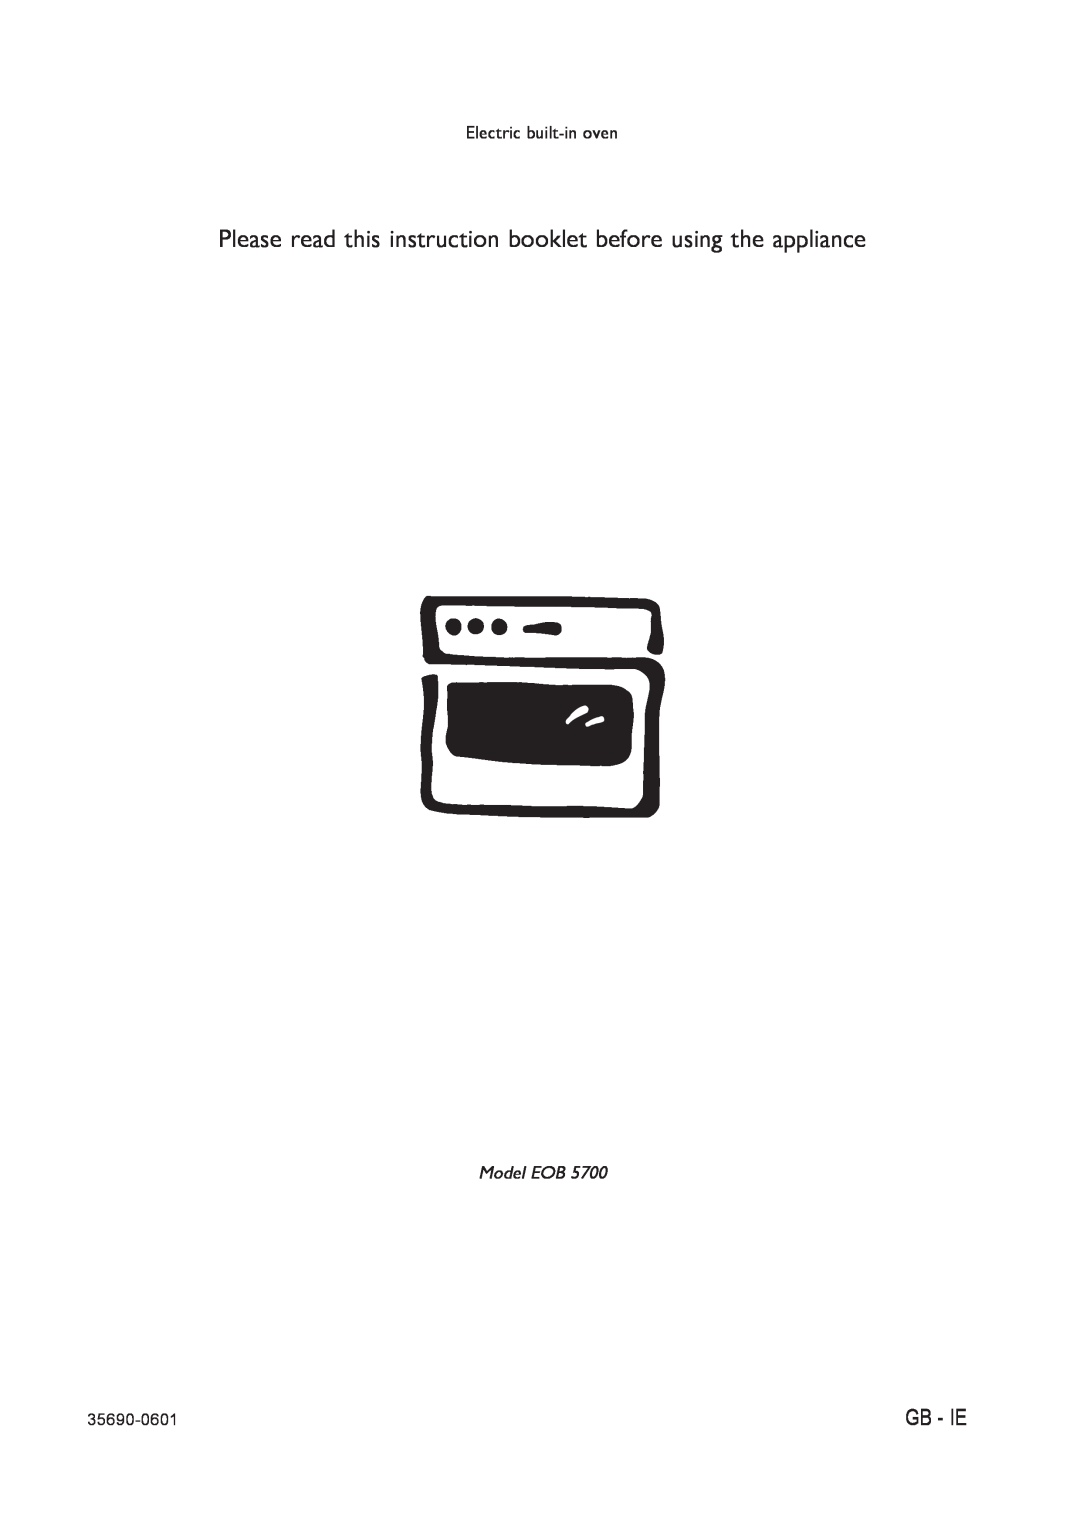 Electrolux EOB 5700 manual Please read this instruction booklet before using the appliance, Gb - Ie, Model EOB, 35690-0601 